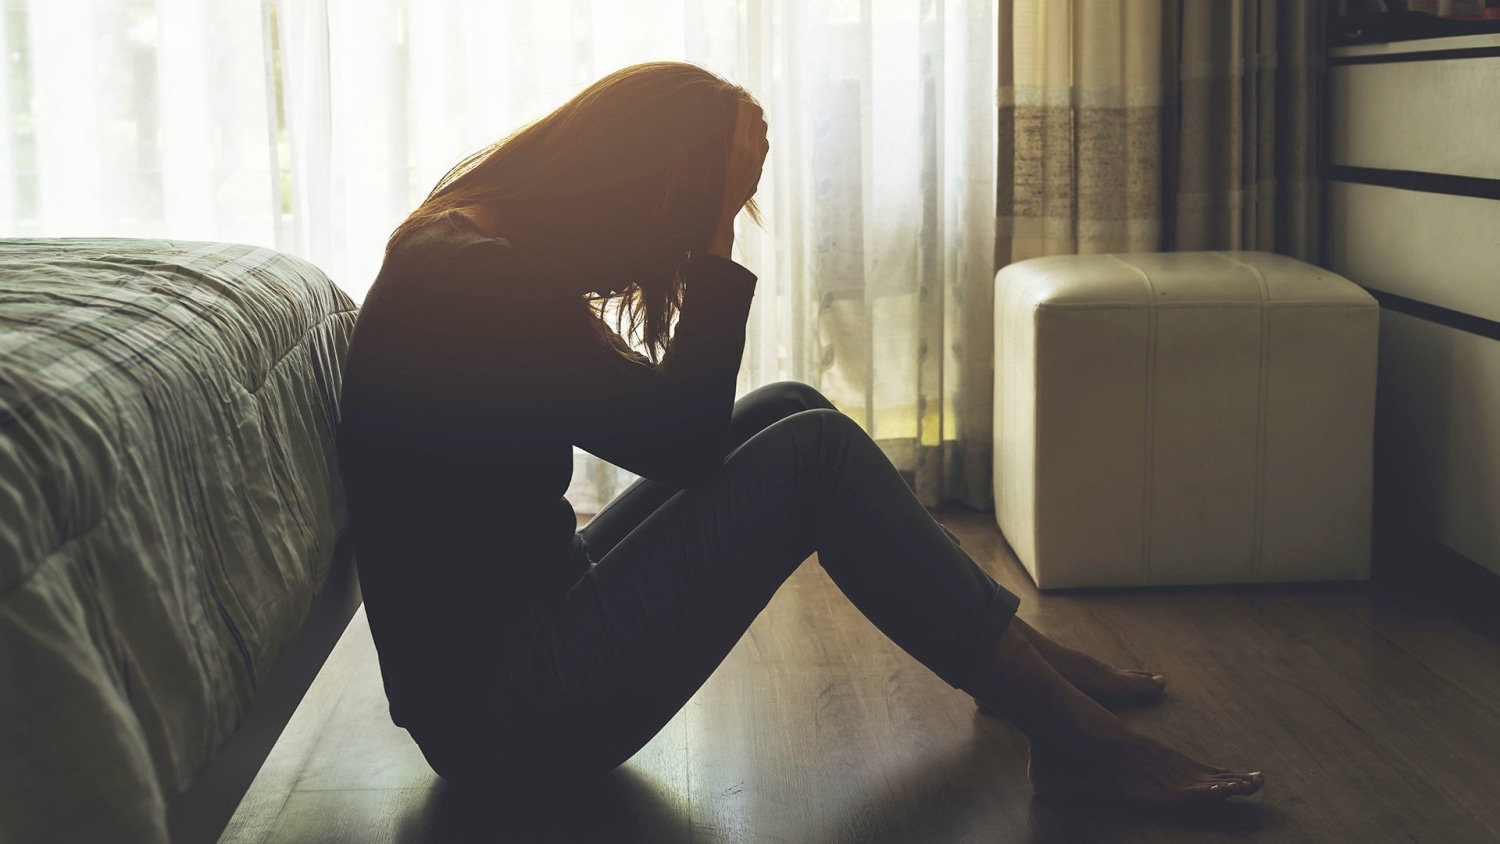 Sad And Depressed? Here’s What You Need To Know